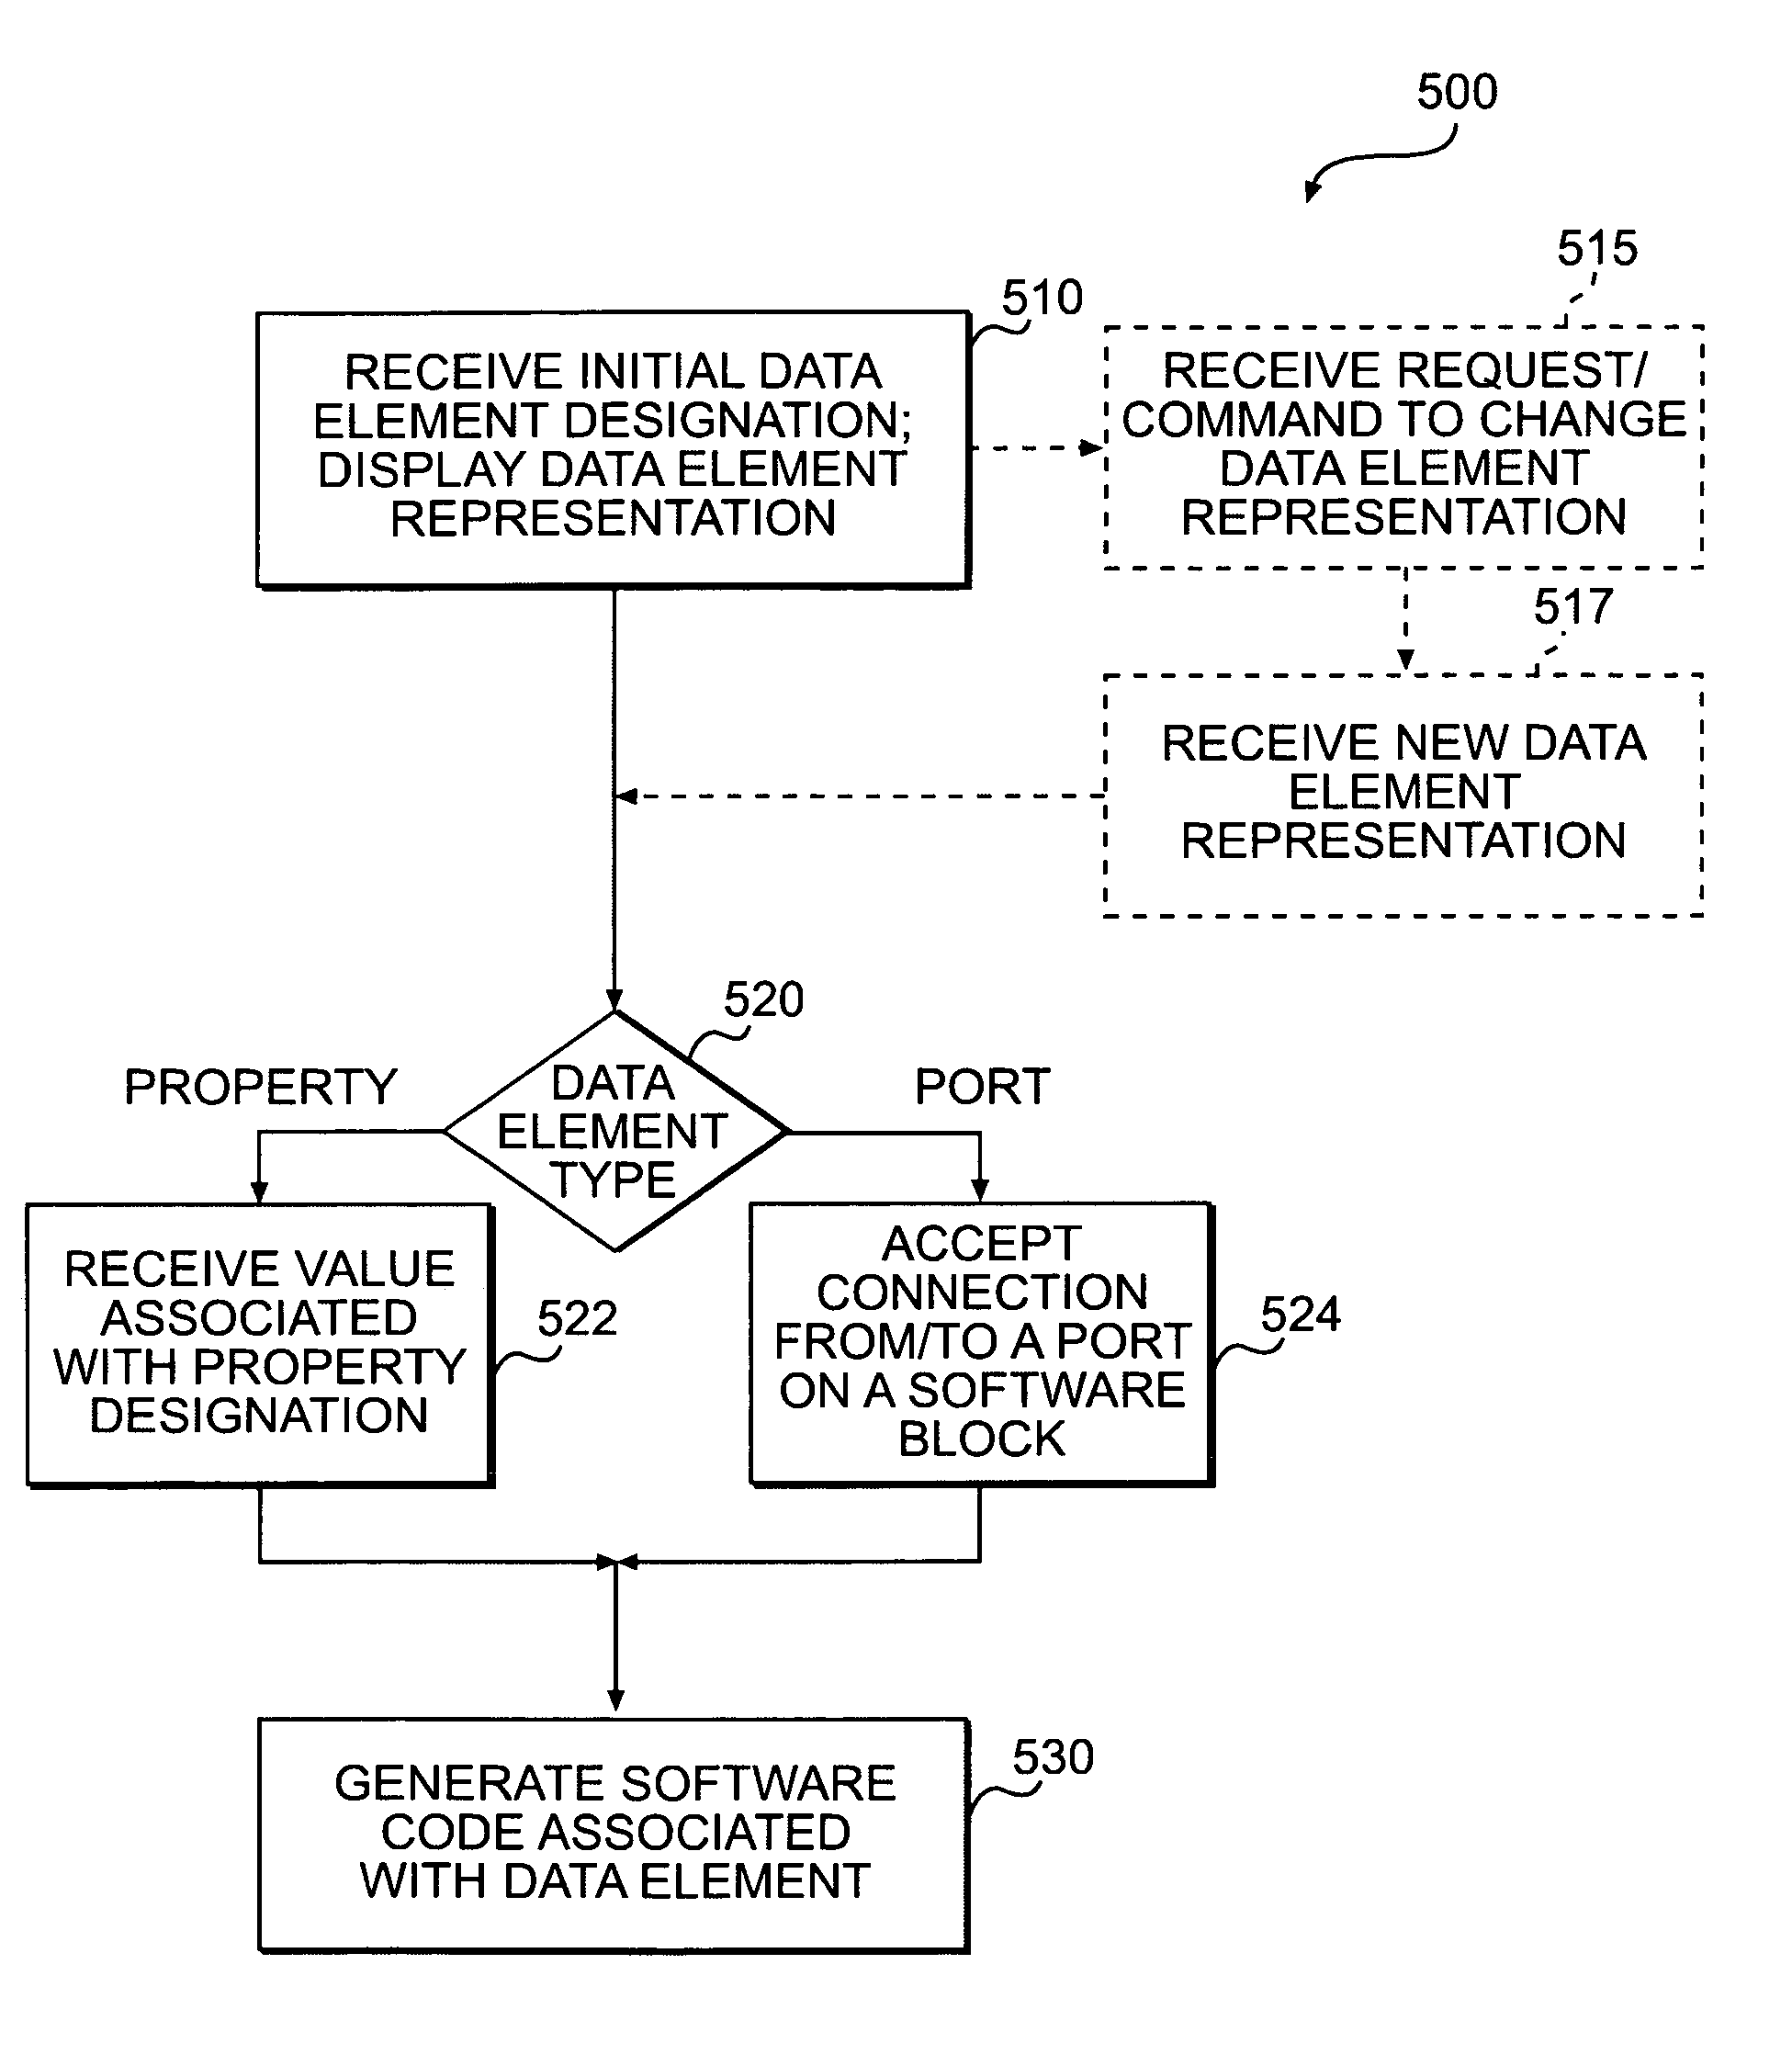 Data elements with selectable signal/parameter behavior control